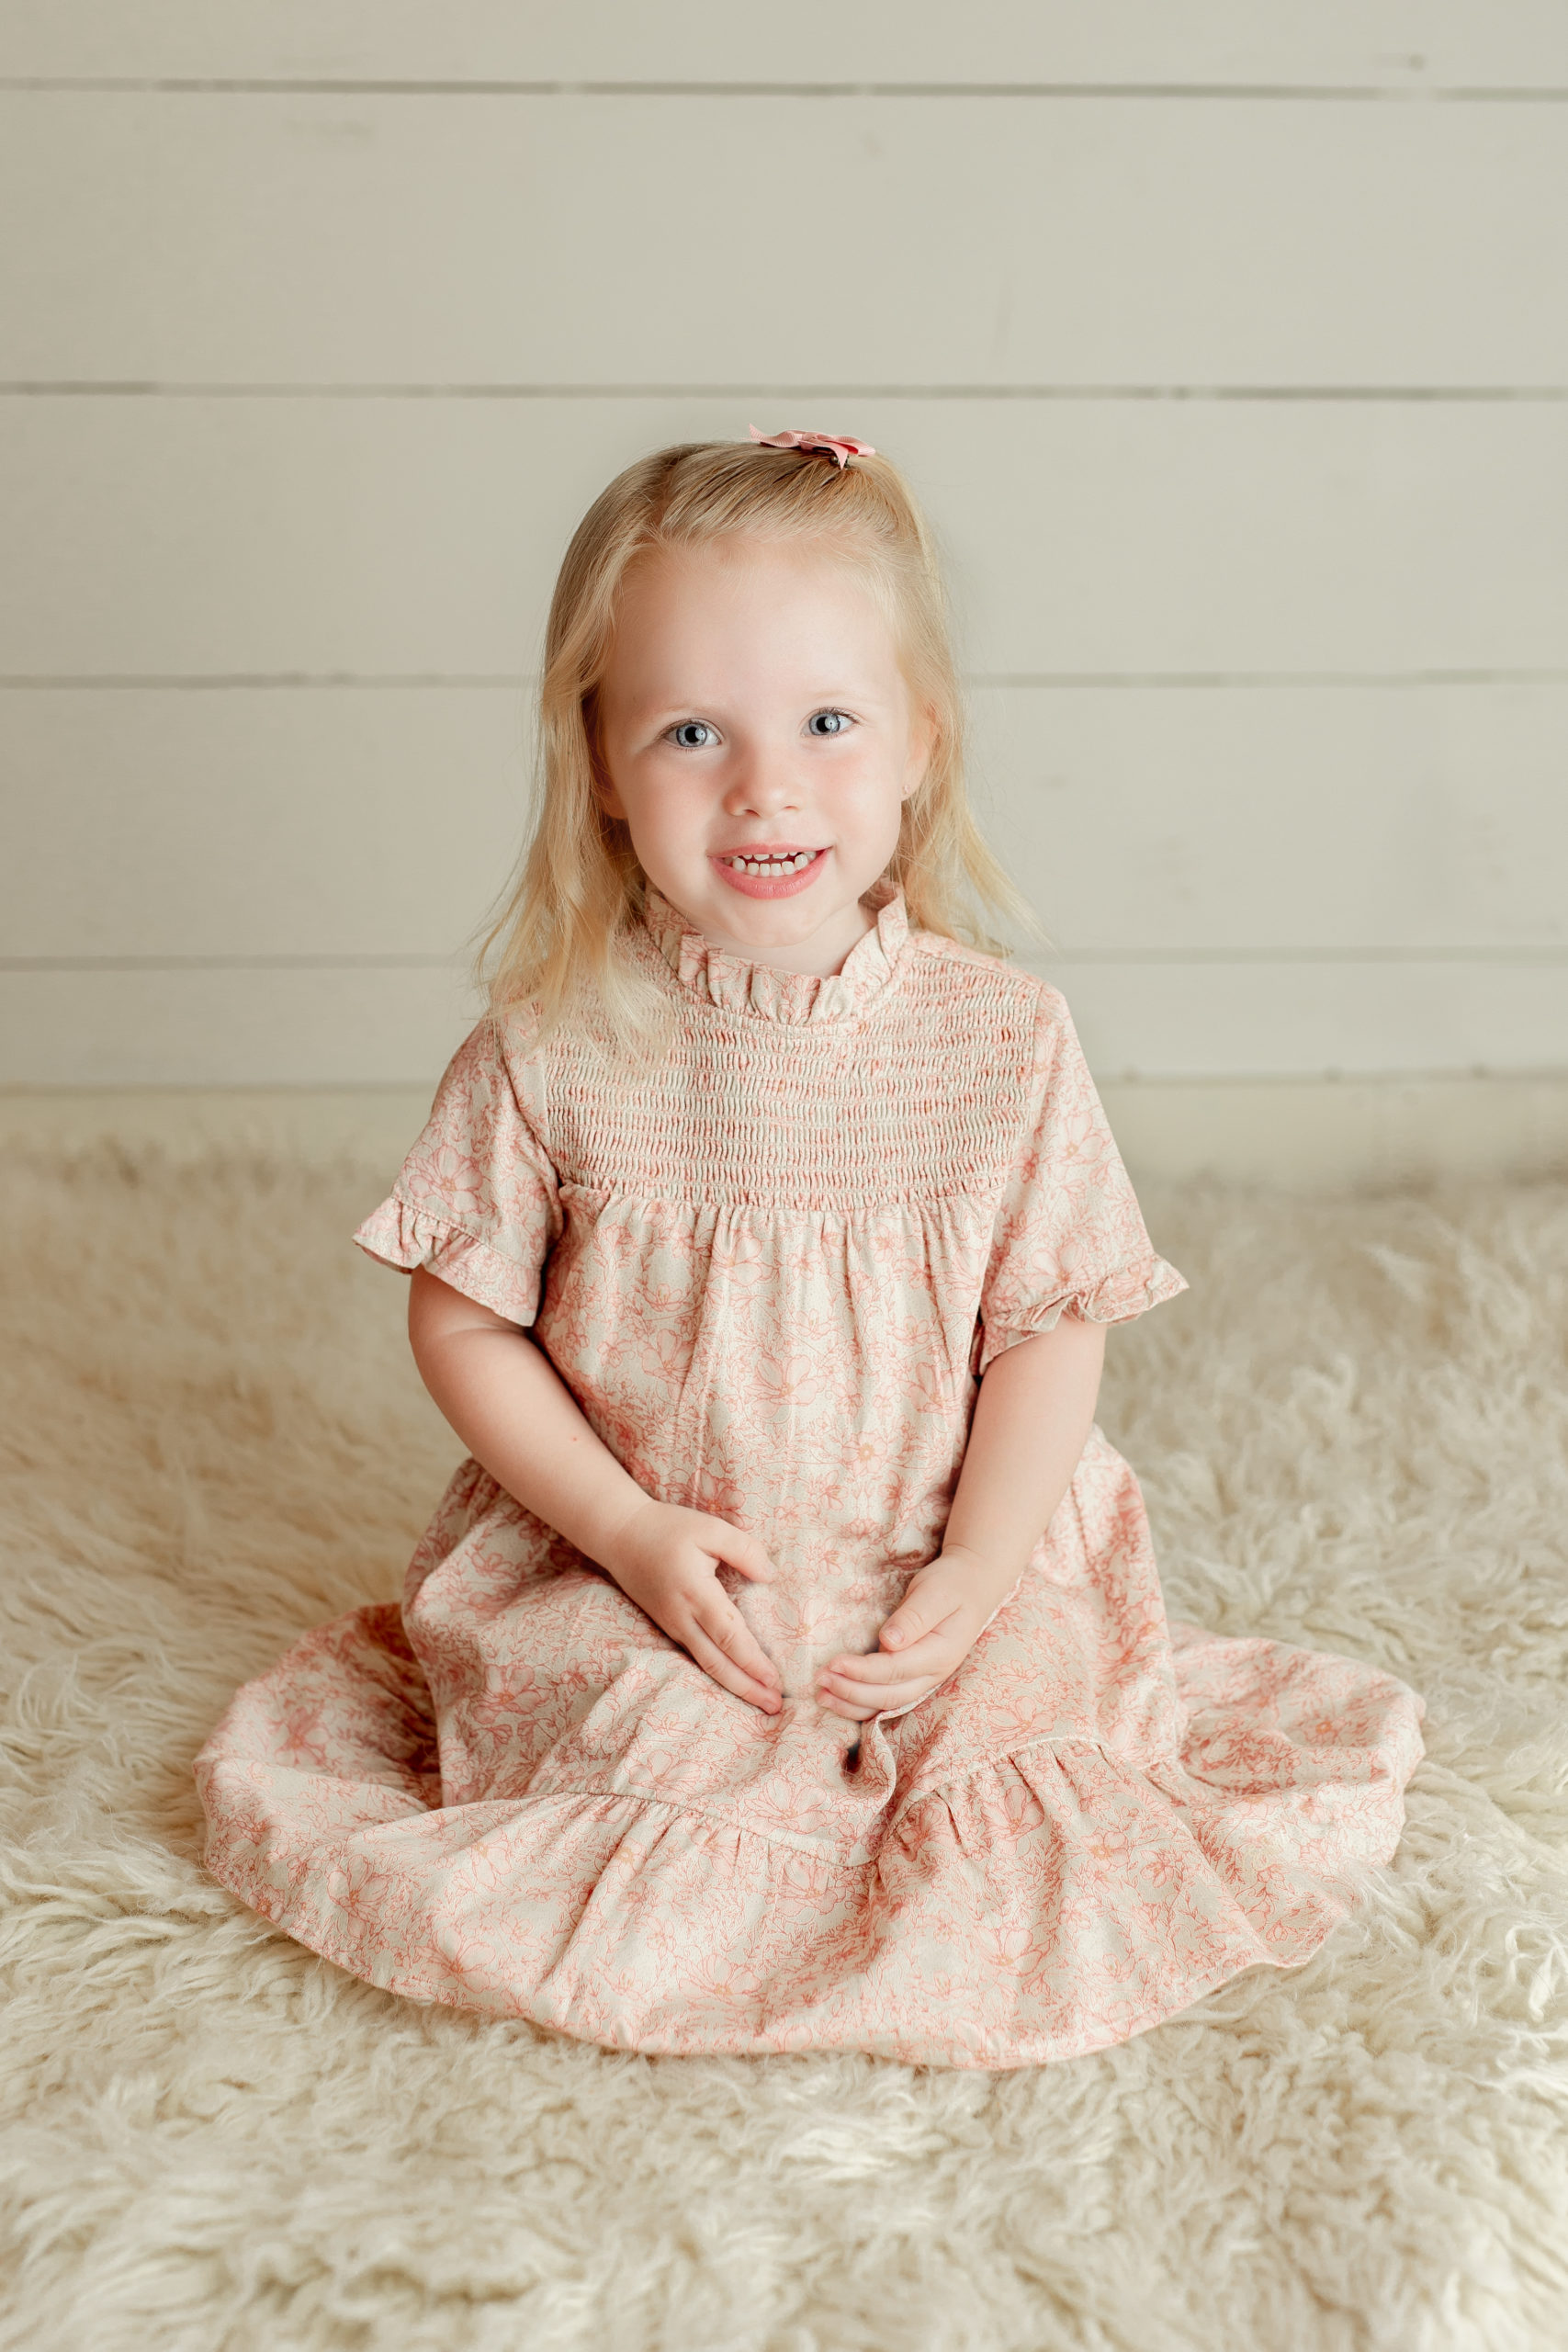 Milwaukee Family Photography studio with a picture of a girl for her third birthday wearing a pale cream floral dress